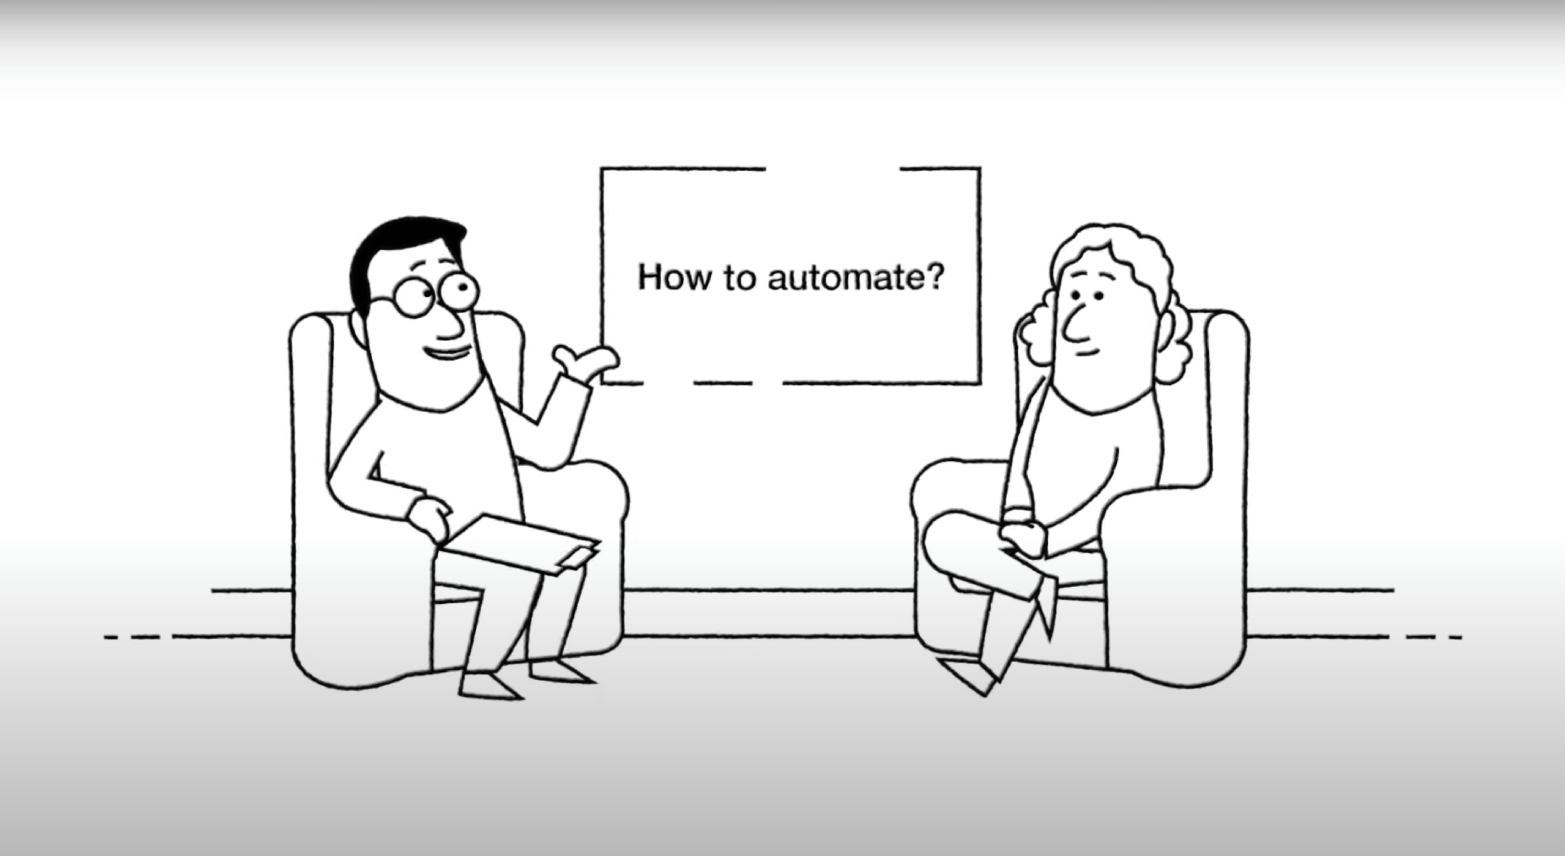 The platform for AI at work, episode 3: Build your automations